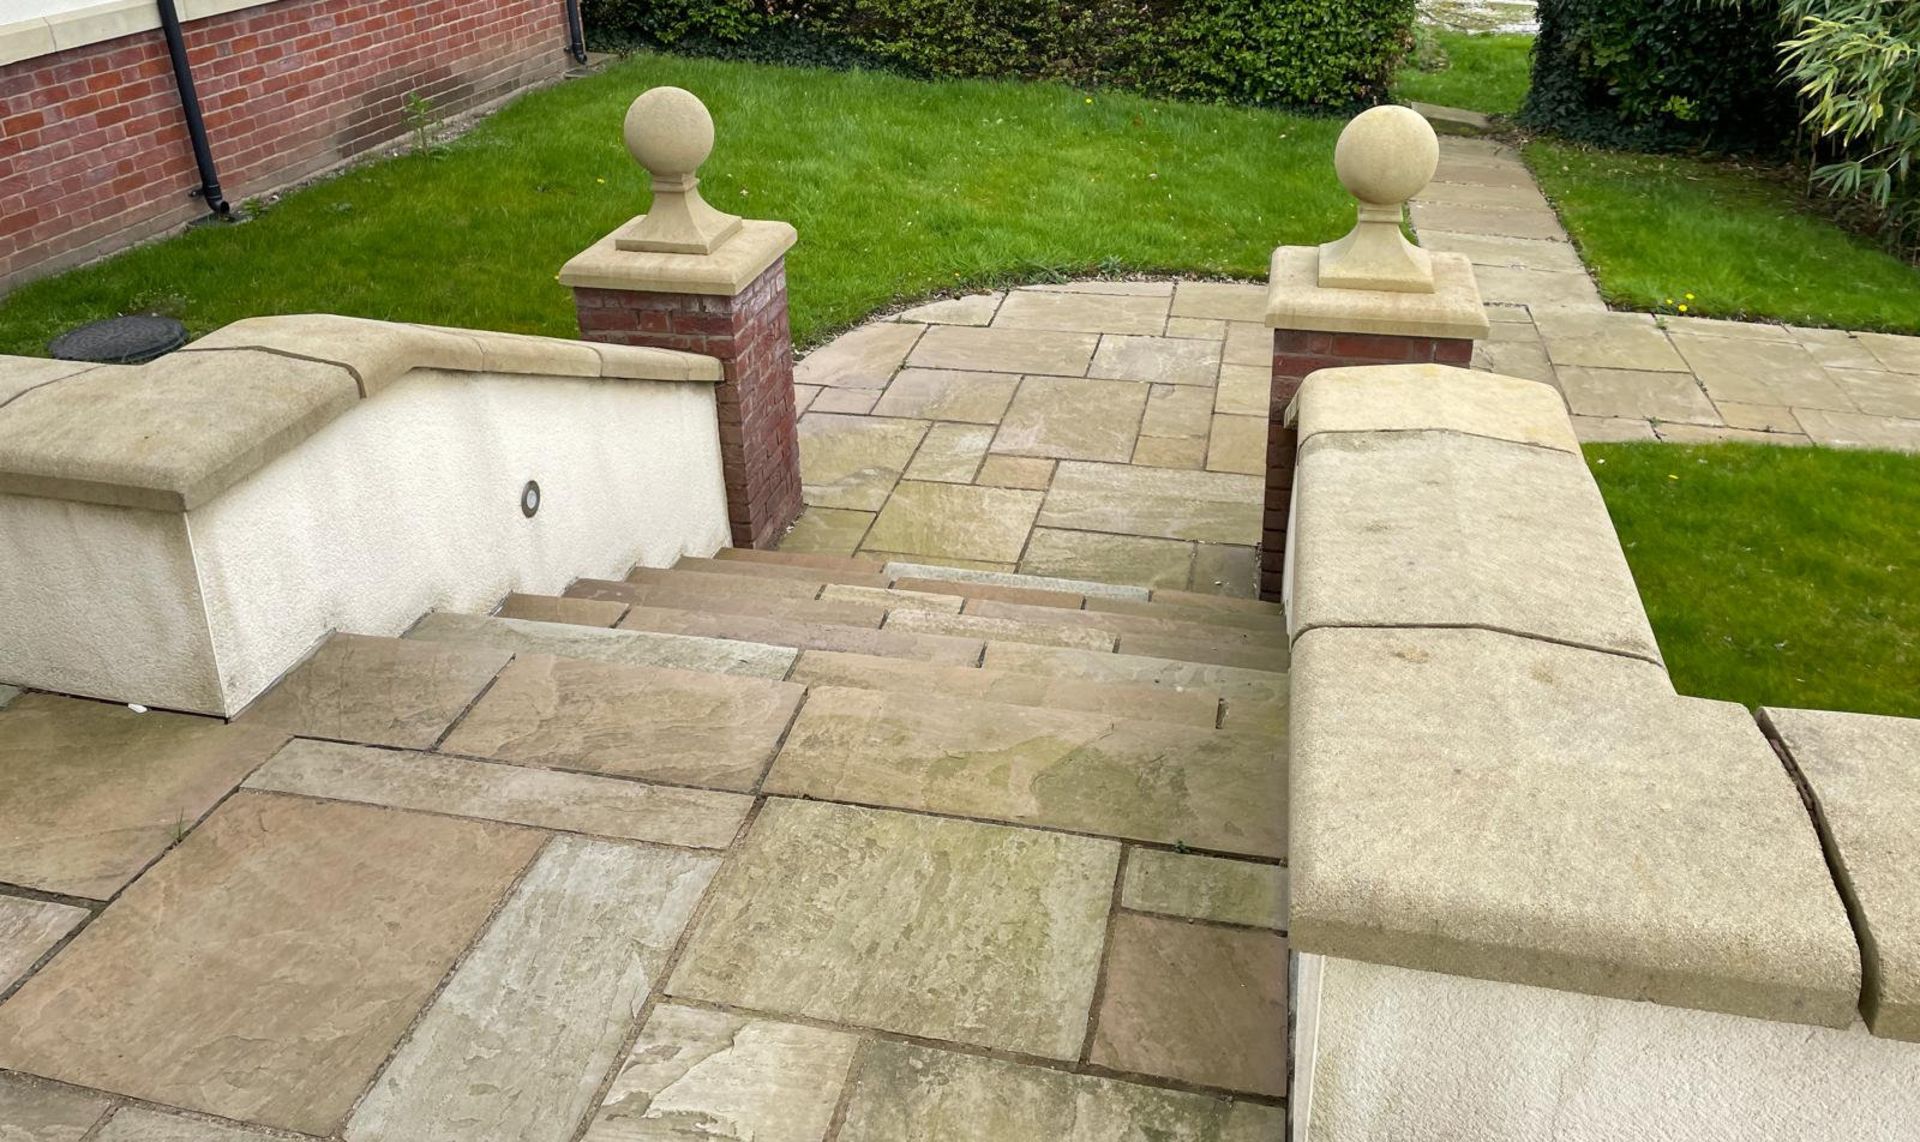 Large Quantity of Yorkstone Paving - Over 340sqm - CL896 - NO VAT ON THE HAMMER - Location: Wilmslow - Image 51 of 57